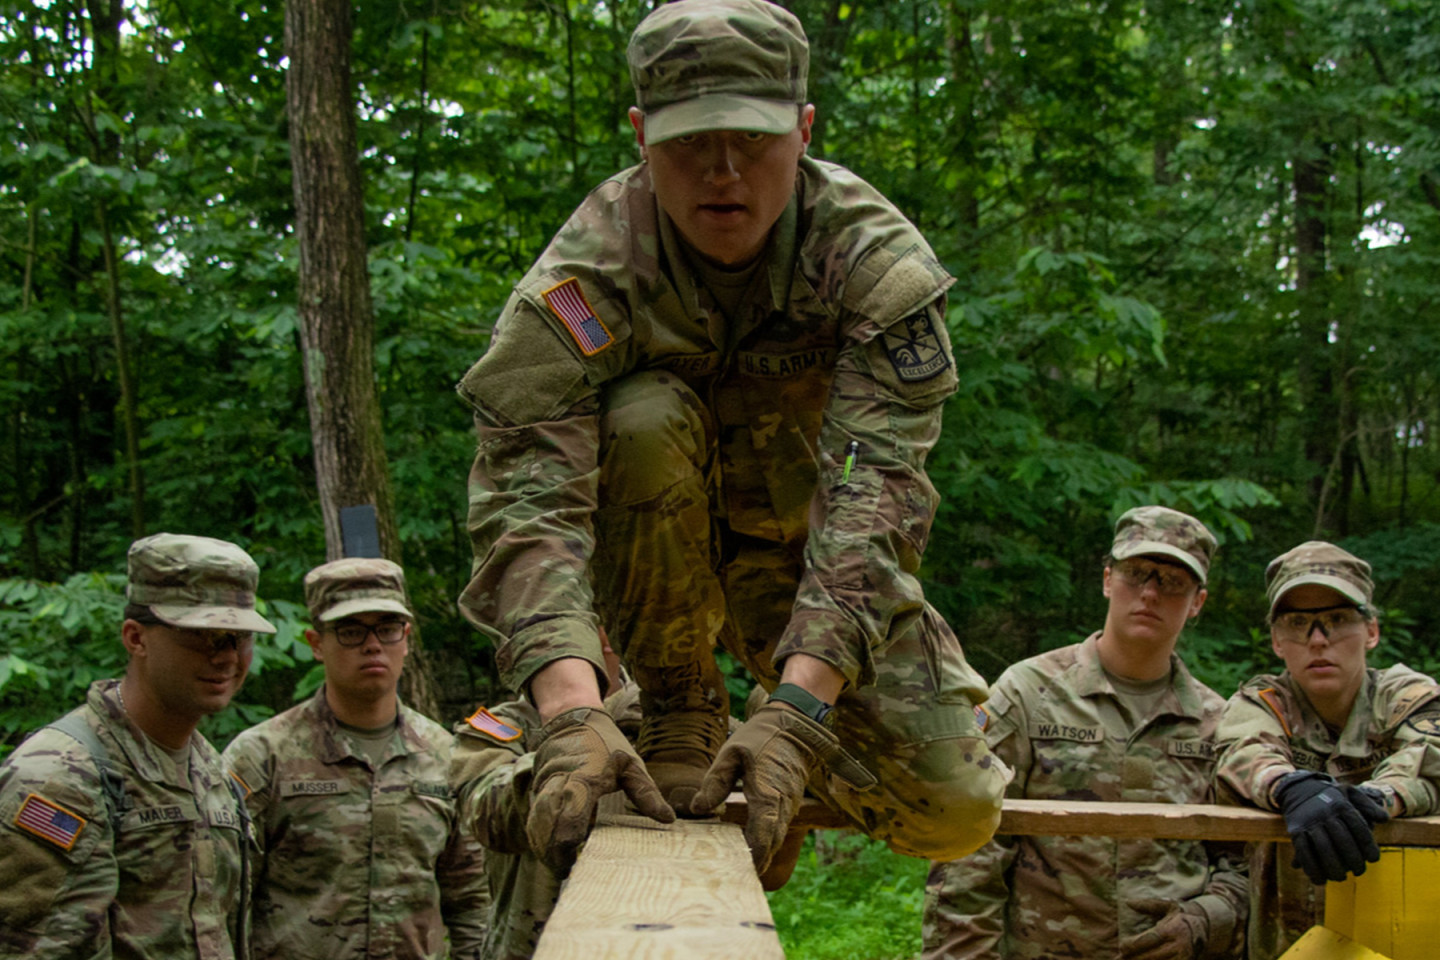 Cadet Cyle Dyer negotiating a balance beam during the obstacle course. Photo courtesy of Ashley Goodwin of Good Ash Studios